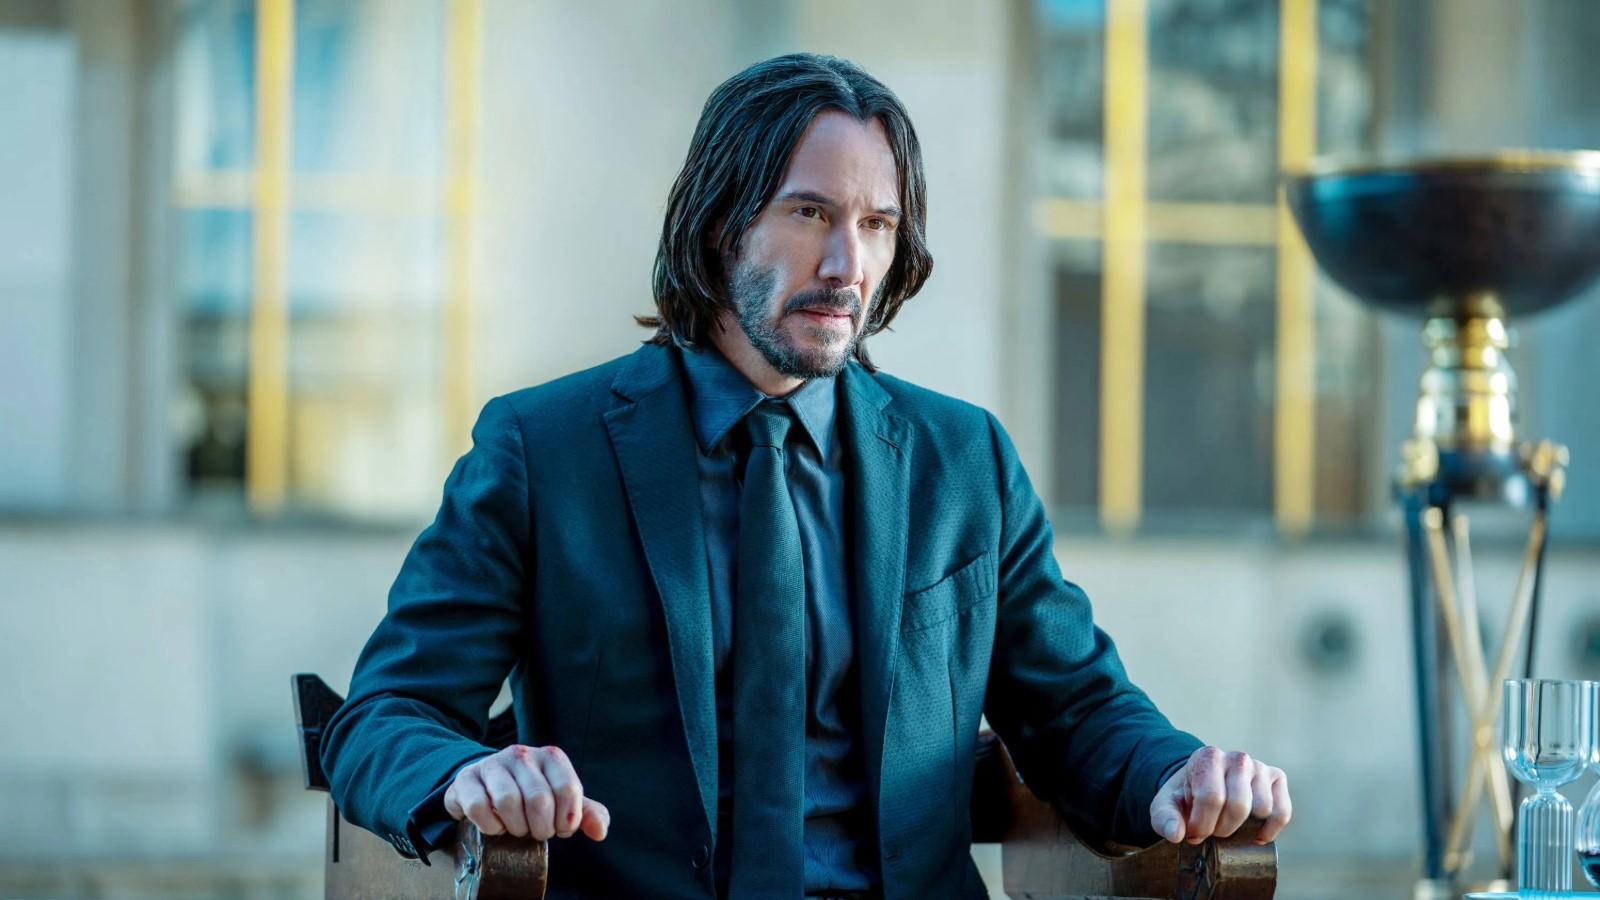 Keanu Reeves as John Wick in John Wick 4, sitting in a chair and wearing a suit